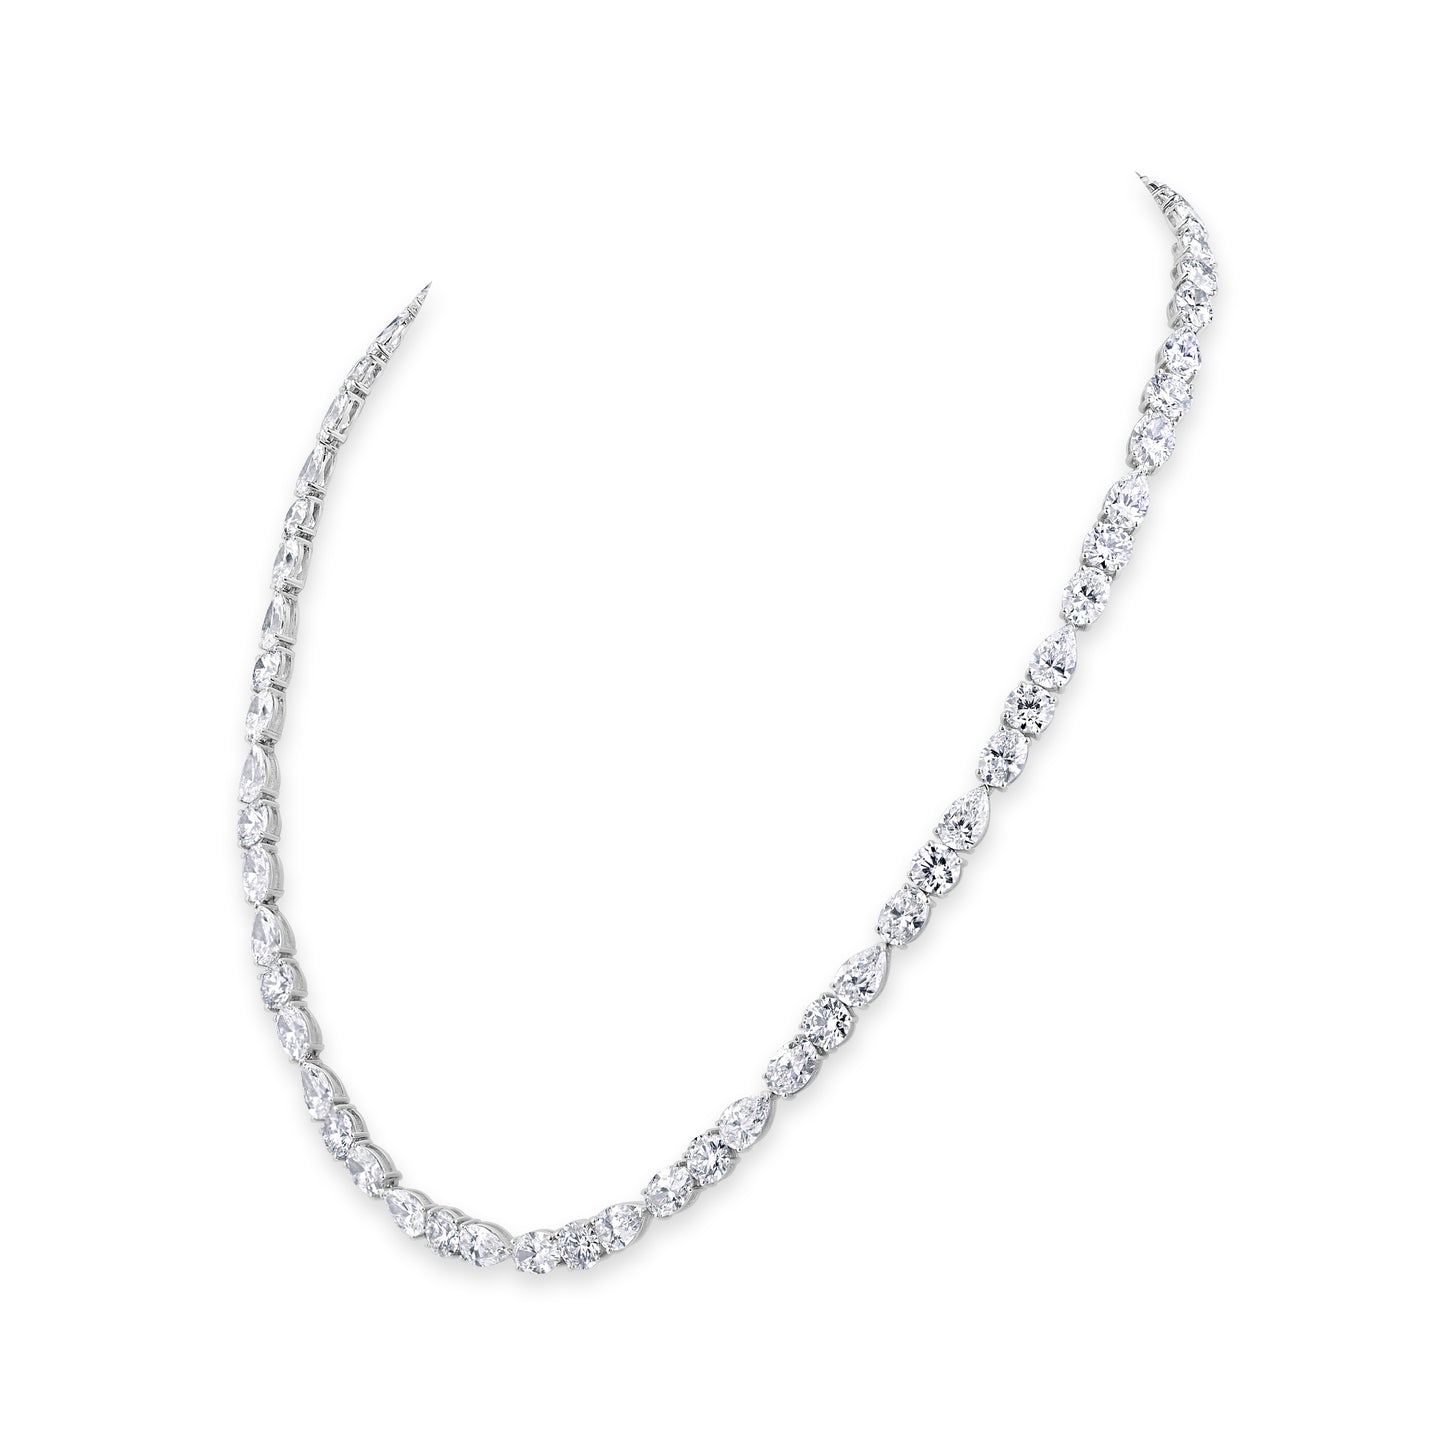 Enchanting Fusion: Lab-Grown Diamond Necklace in a Medley of Round, Pear, and Oval Splendor